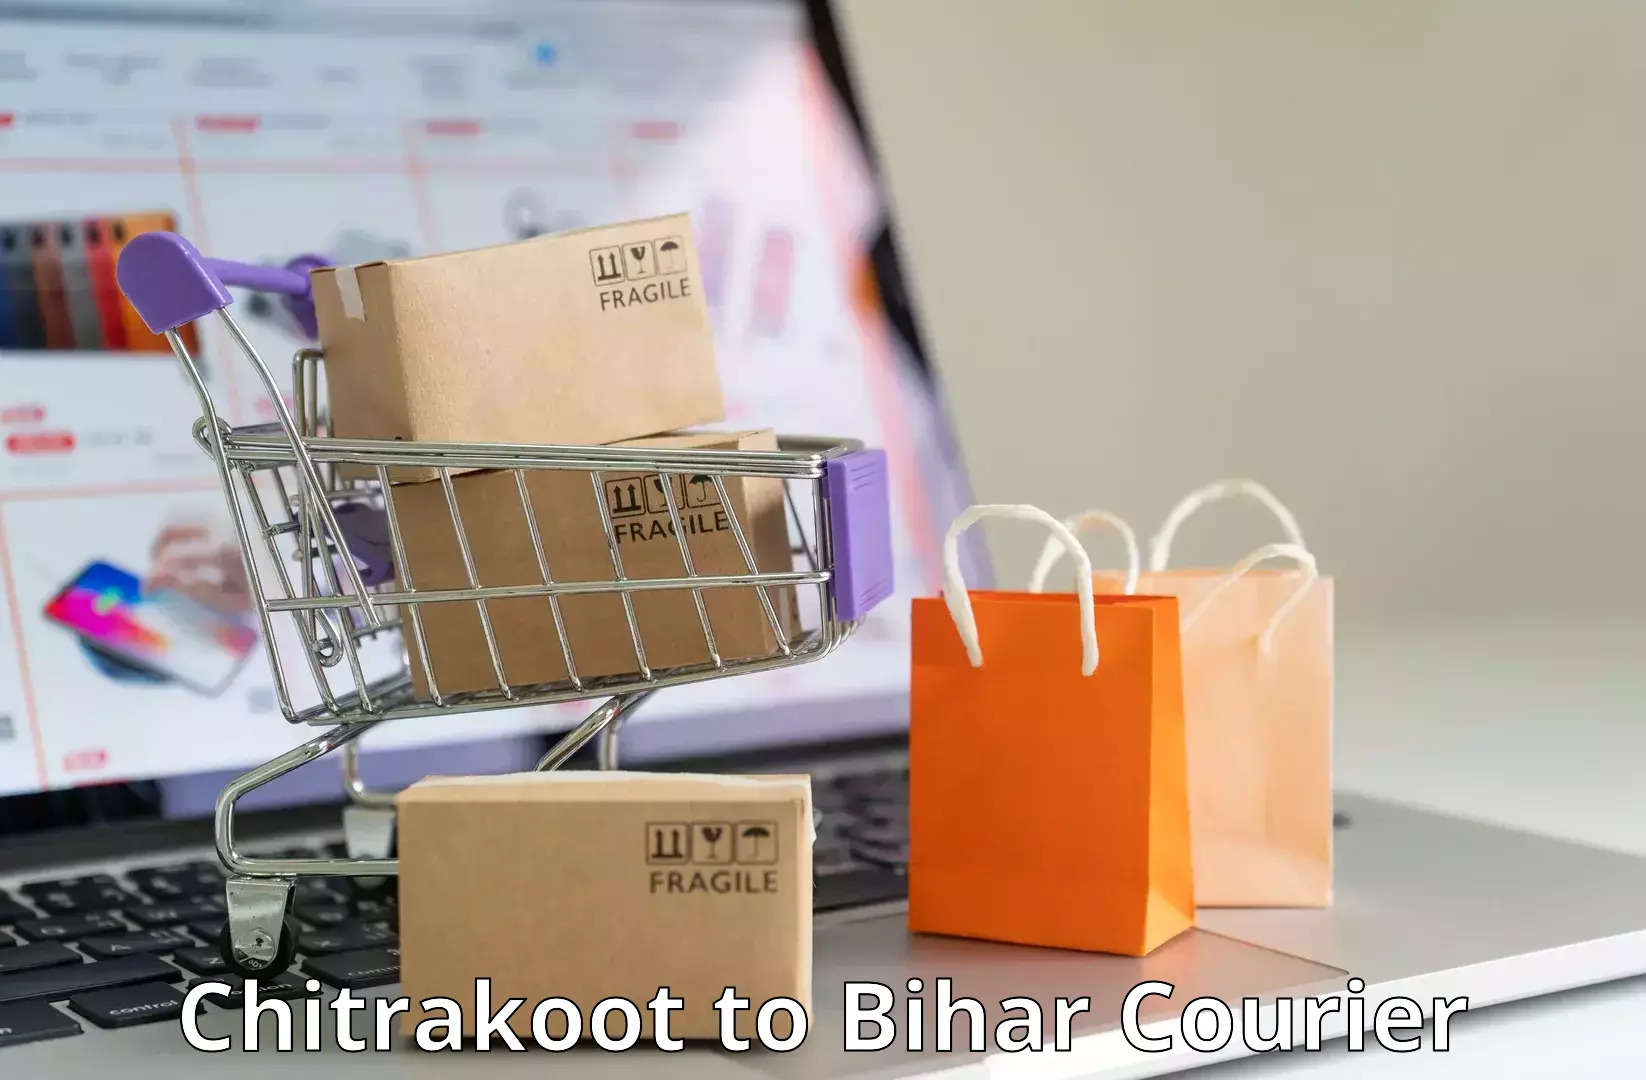 Cost-effective shipping solutions Chitrakoot to Bikramganj